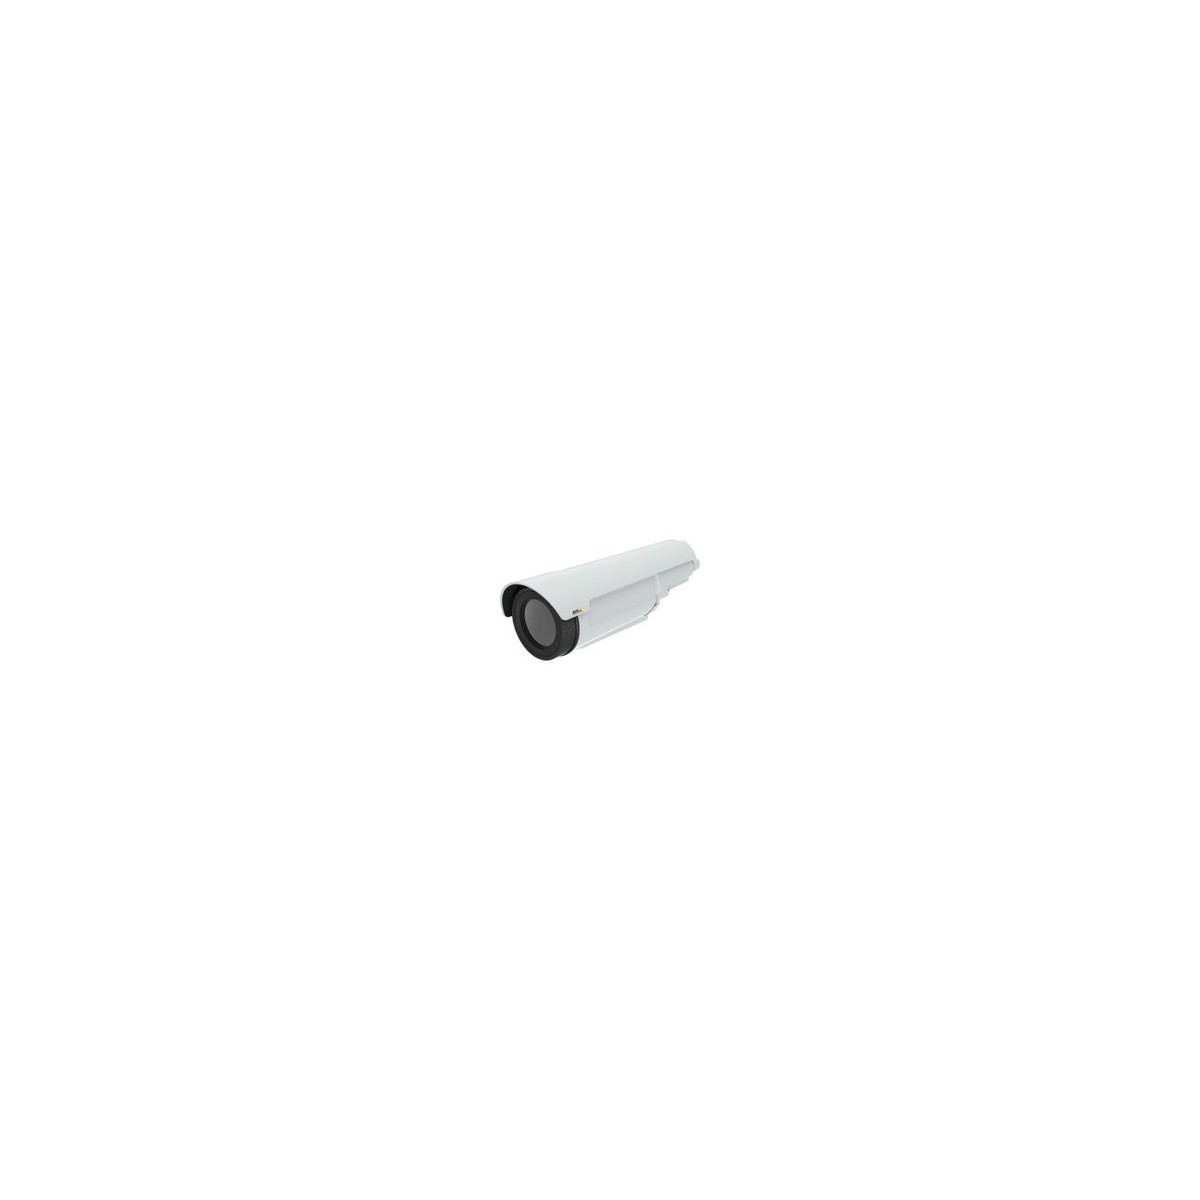 Axis 0977-001 - IP security camera - Outdoor - Wired - Multi - Ceiling-wall - Black - White